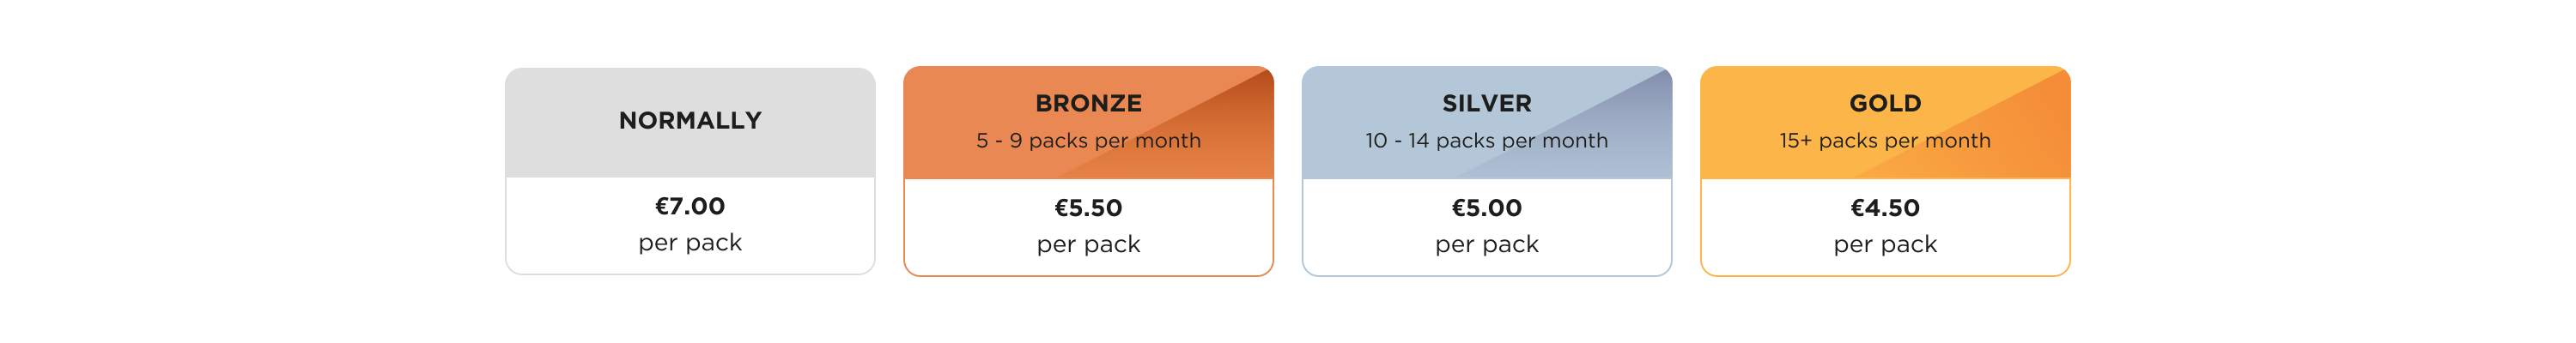 Bronze, Silver and Gold Subscription Tiers